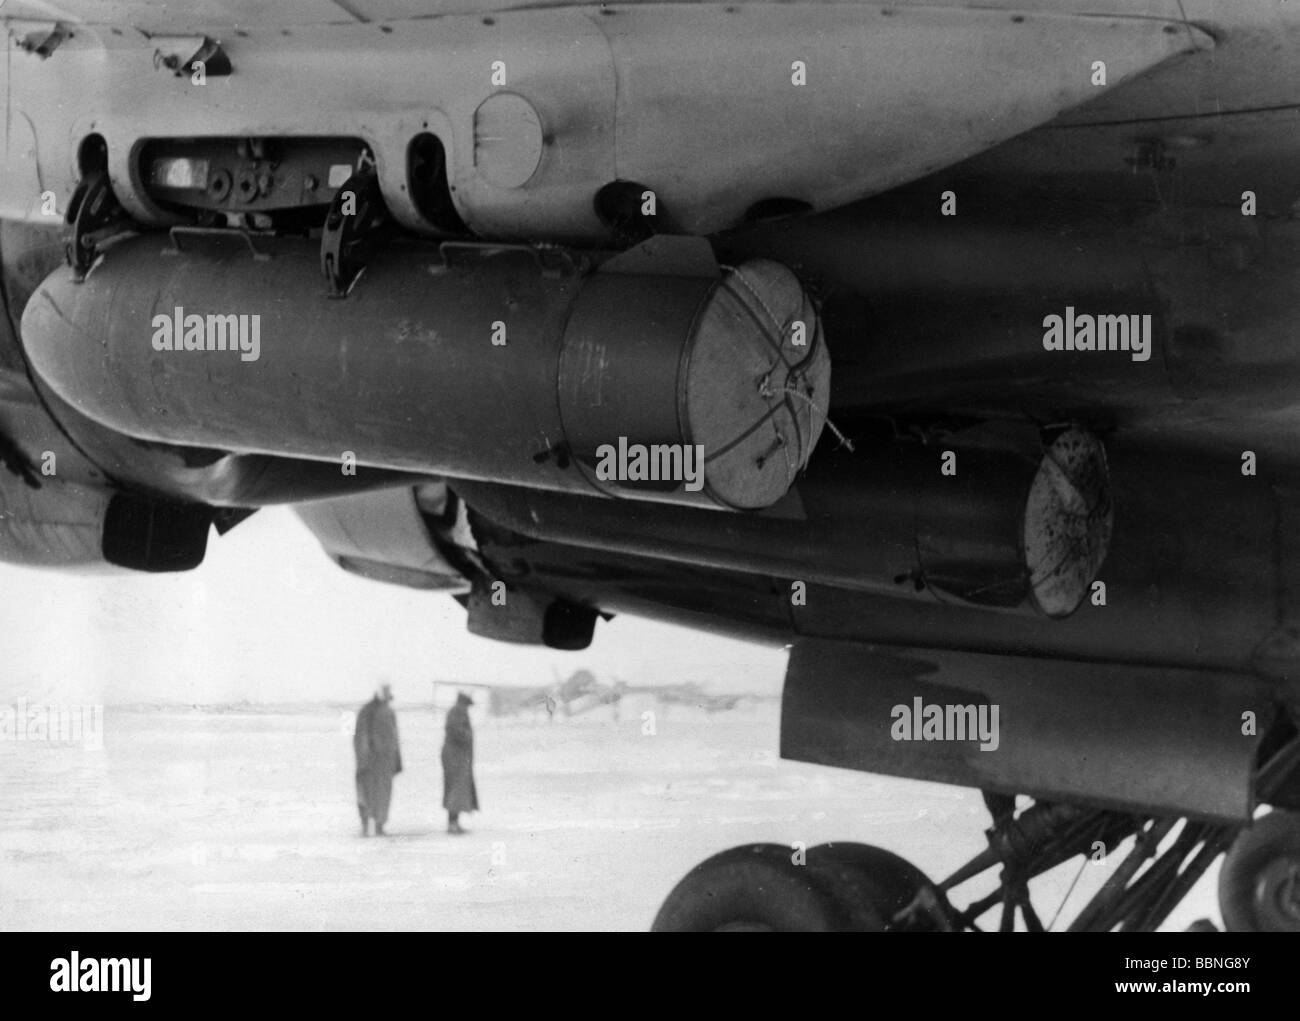 events, Second World War / WWII, aerial warfare, bombs / bombings, aerial delivery units under the wing of a German transport and reconnaissance aircraft Focke-Wulf Fw 200 'Condor', Stalino, Russia, February 1943, Stock Photo